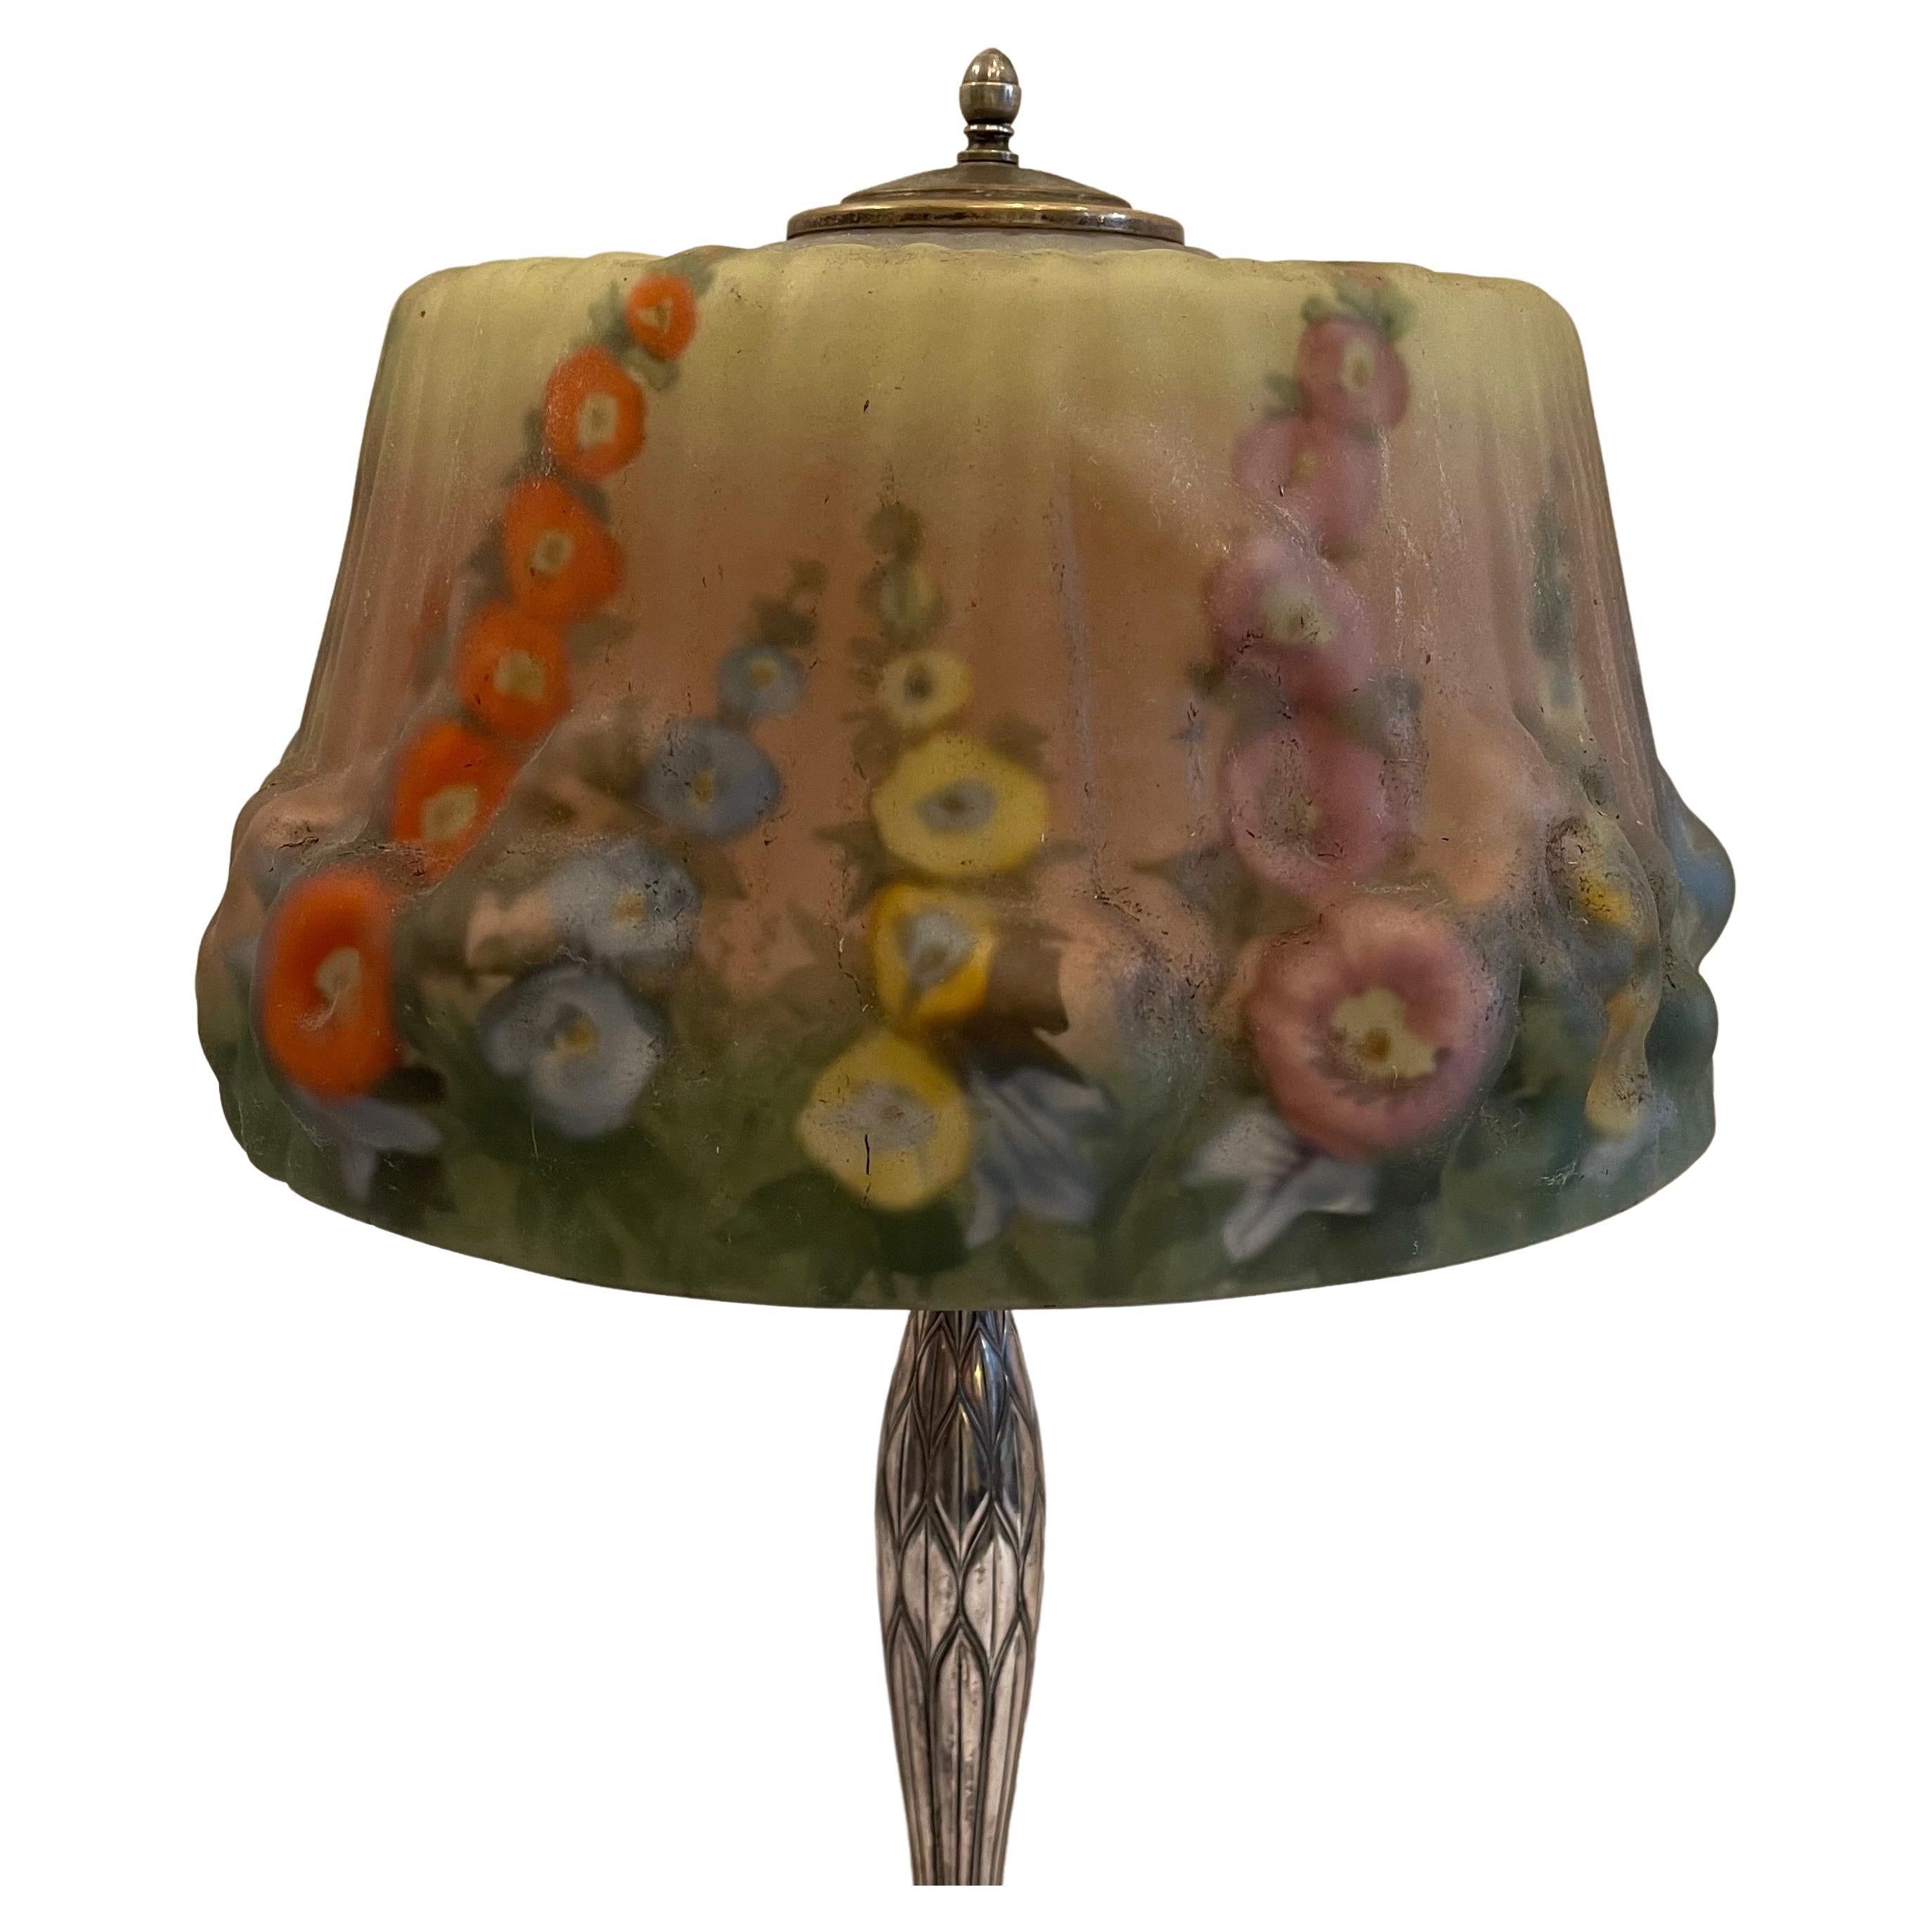 A wonderful Pairpoint Puffy Hollyhock table lamp, c. 1920's. This beautiful Pairpoint puffy shade depicts hollyhocks in full bloom against a cheerful background. Hollyhocks are painted in blues, yellows, oranges and purples with a mixture of green